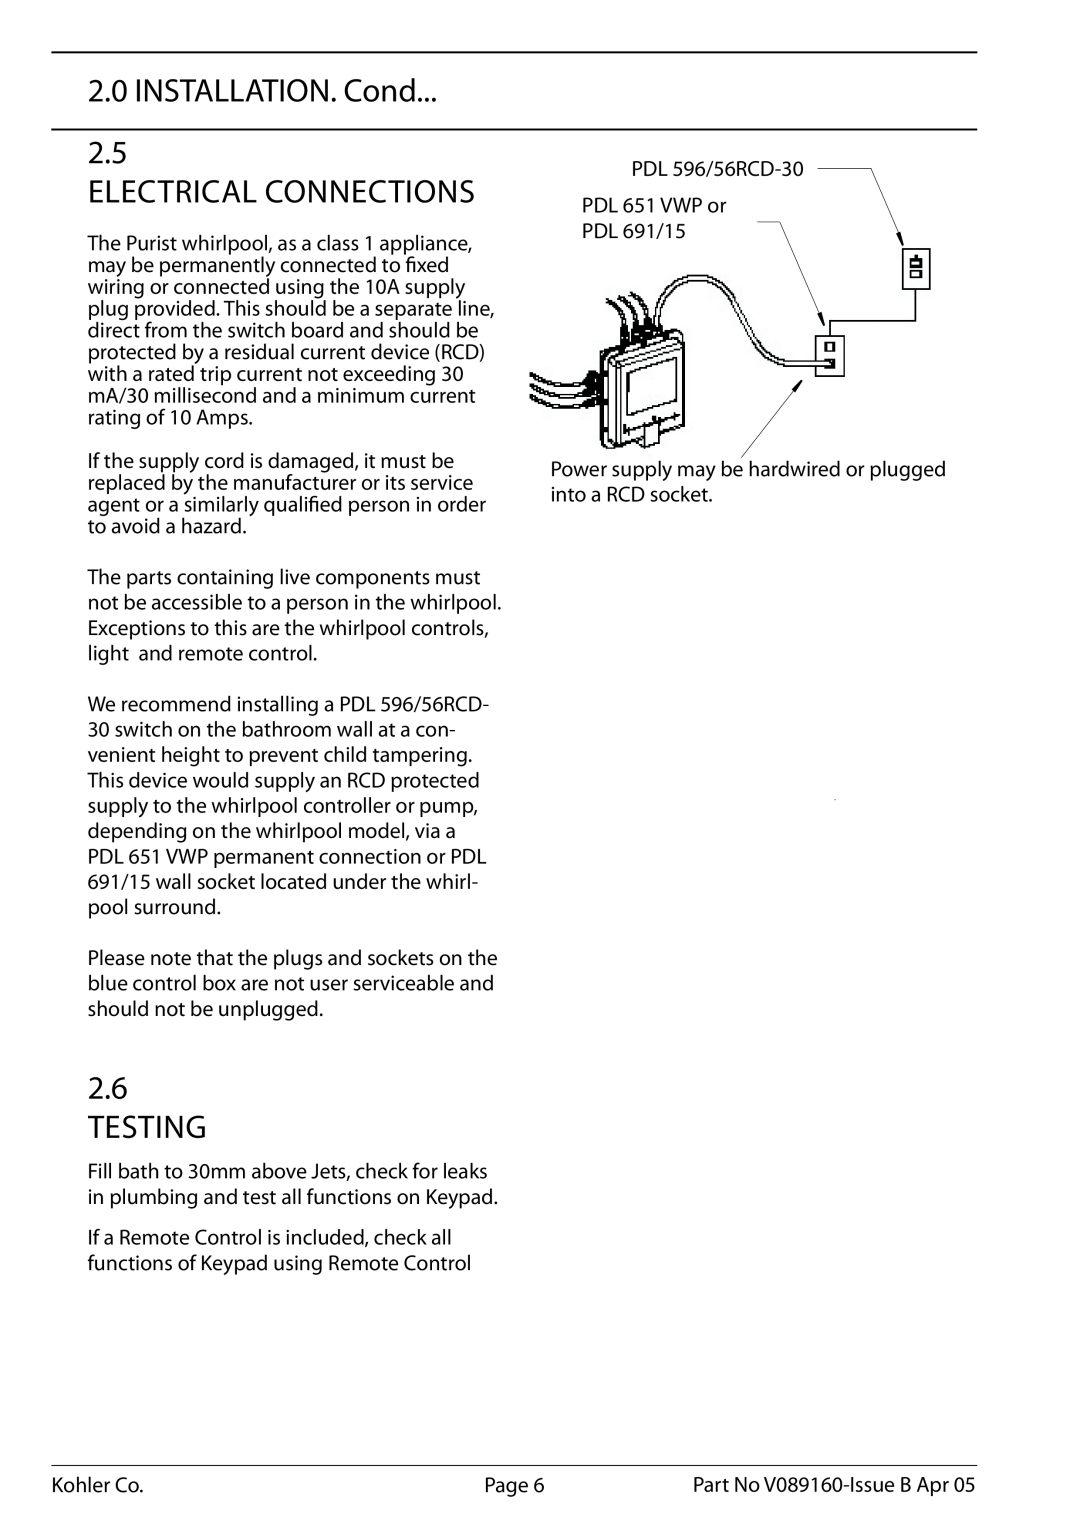 Kohler V089160, K-1110-CT-0 installation instructions INSTALLATION. Cond 2.5 ELECTRICAL CONNECTIONS, Testing 